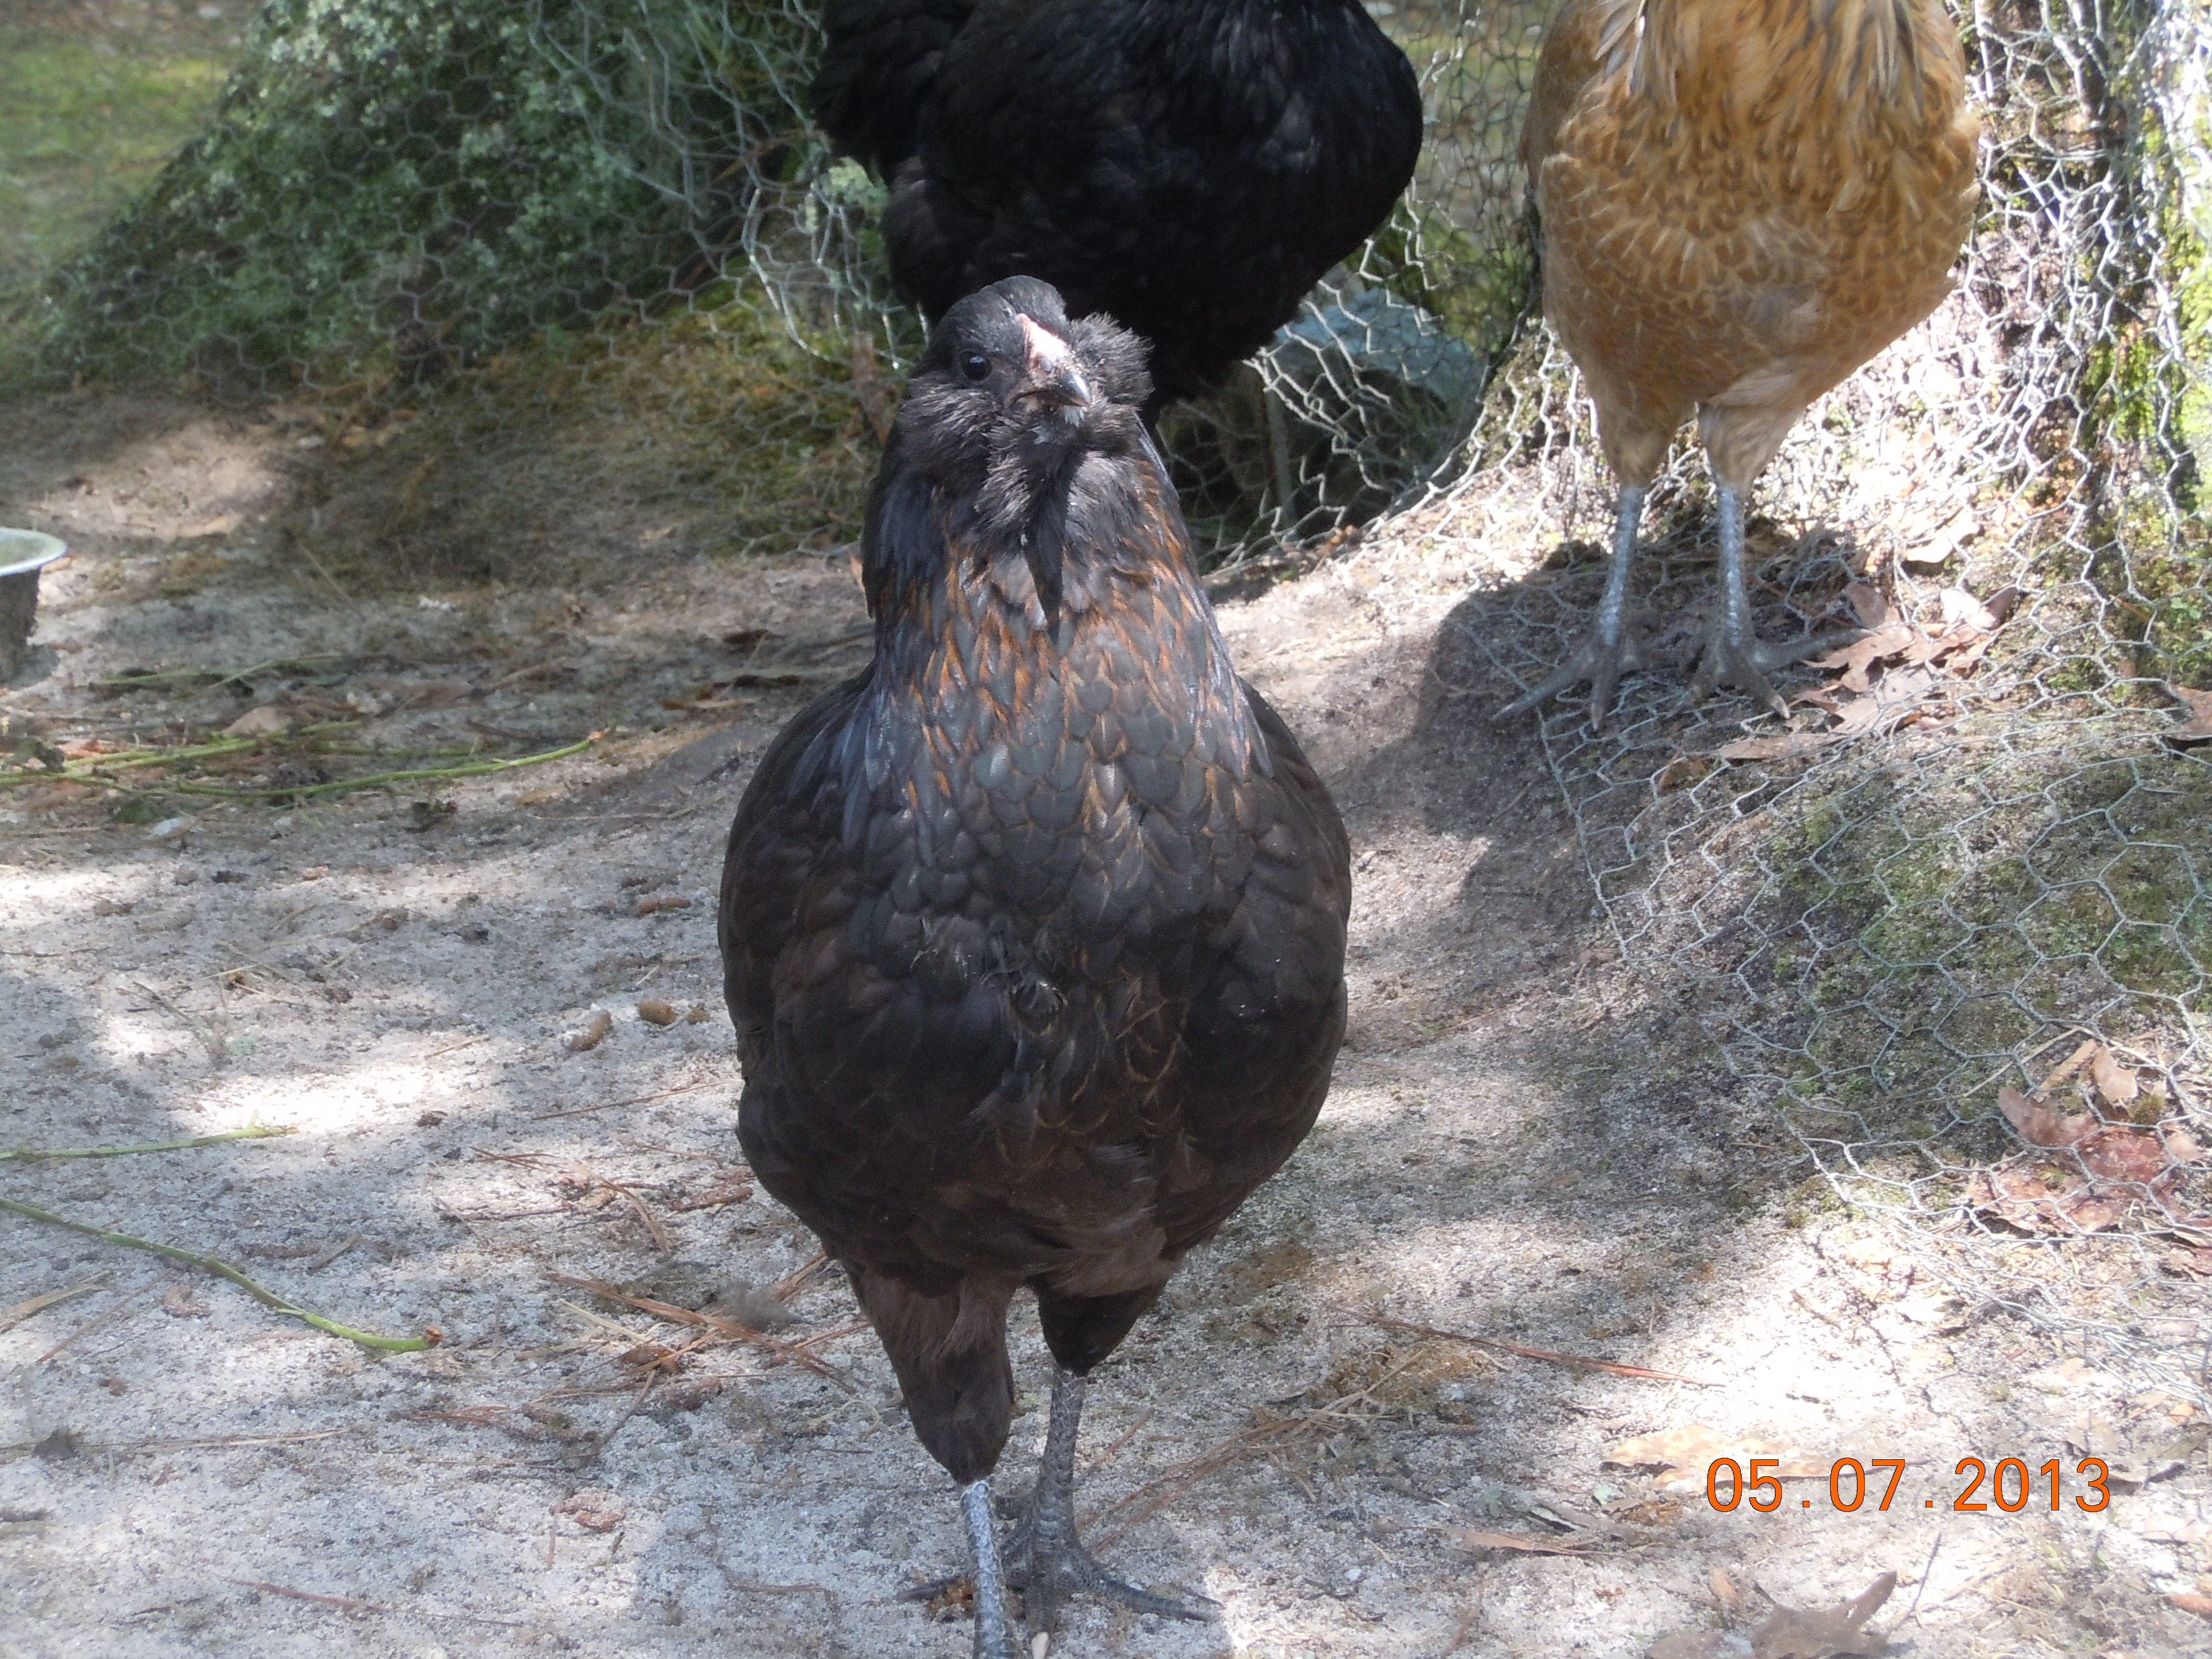 Another of Coco, my Black Copper Marans/ Ameracauna mix